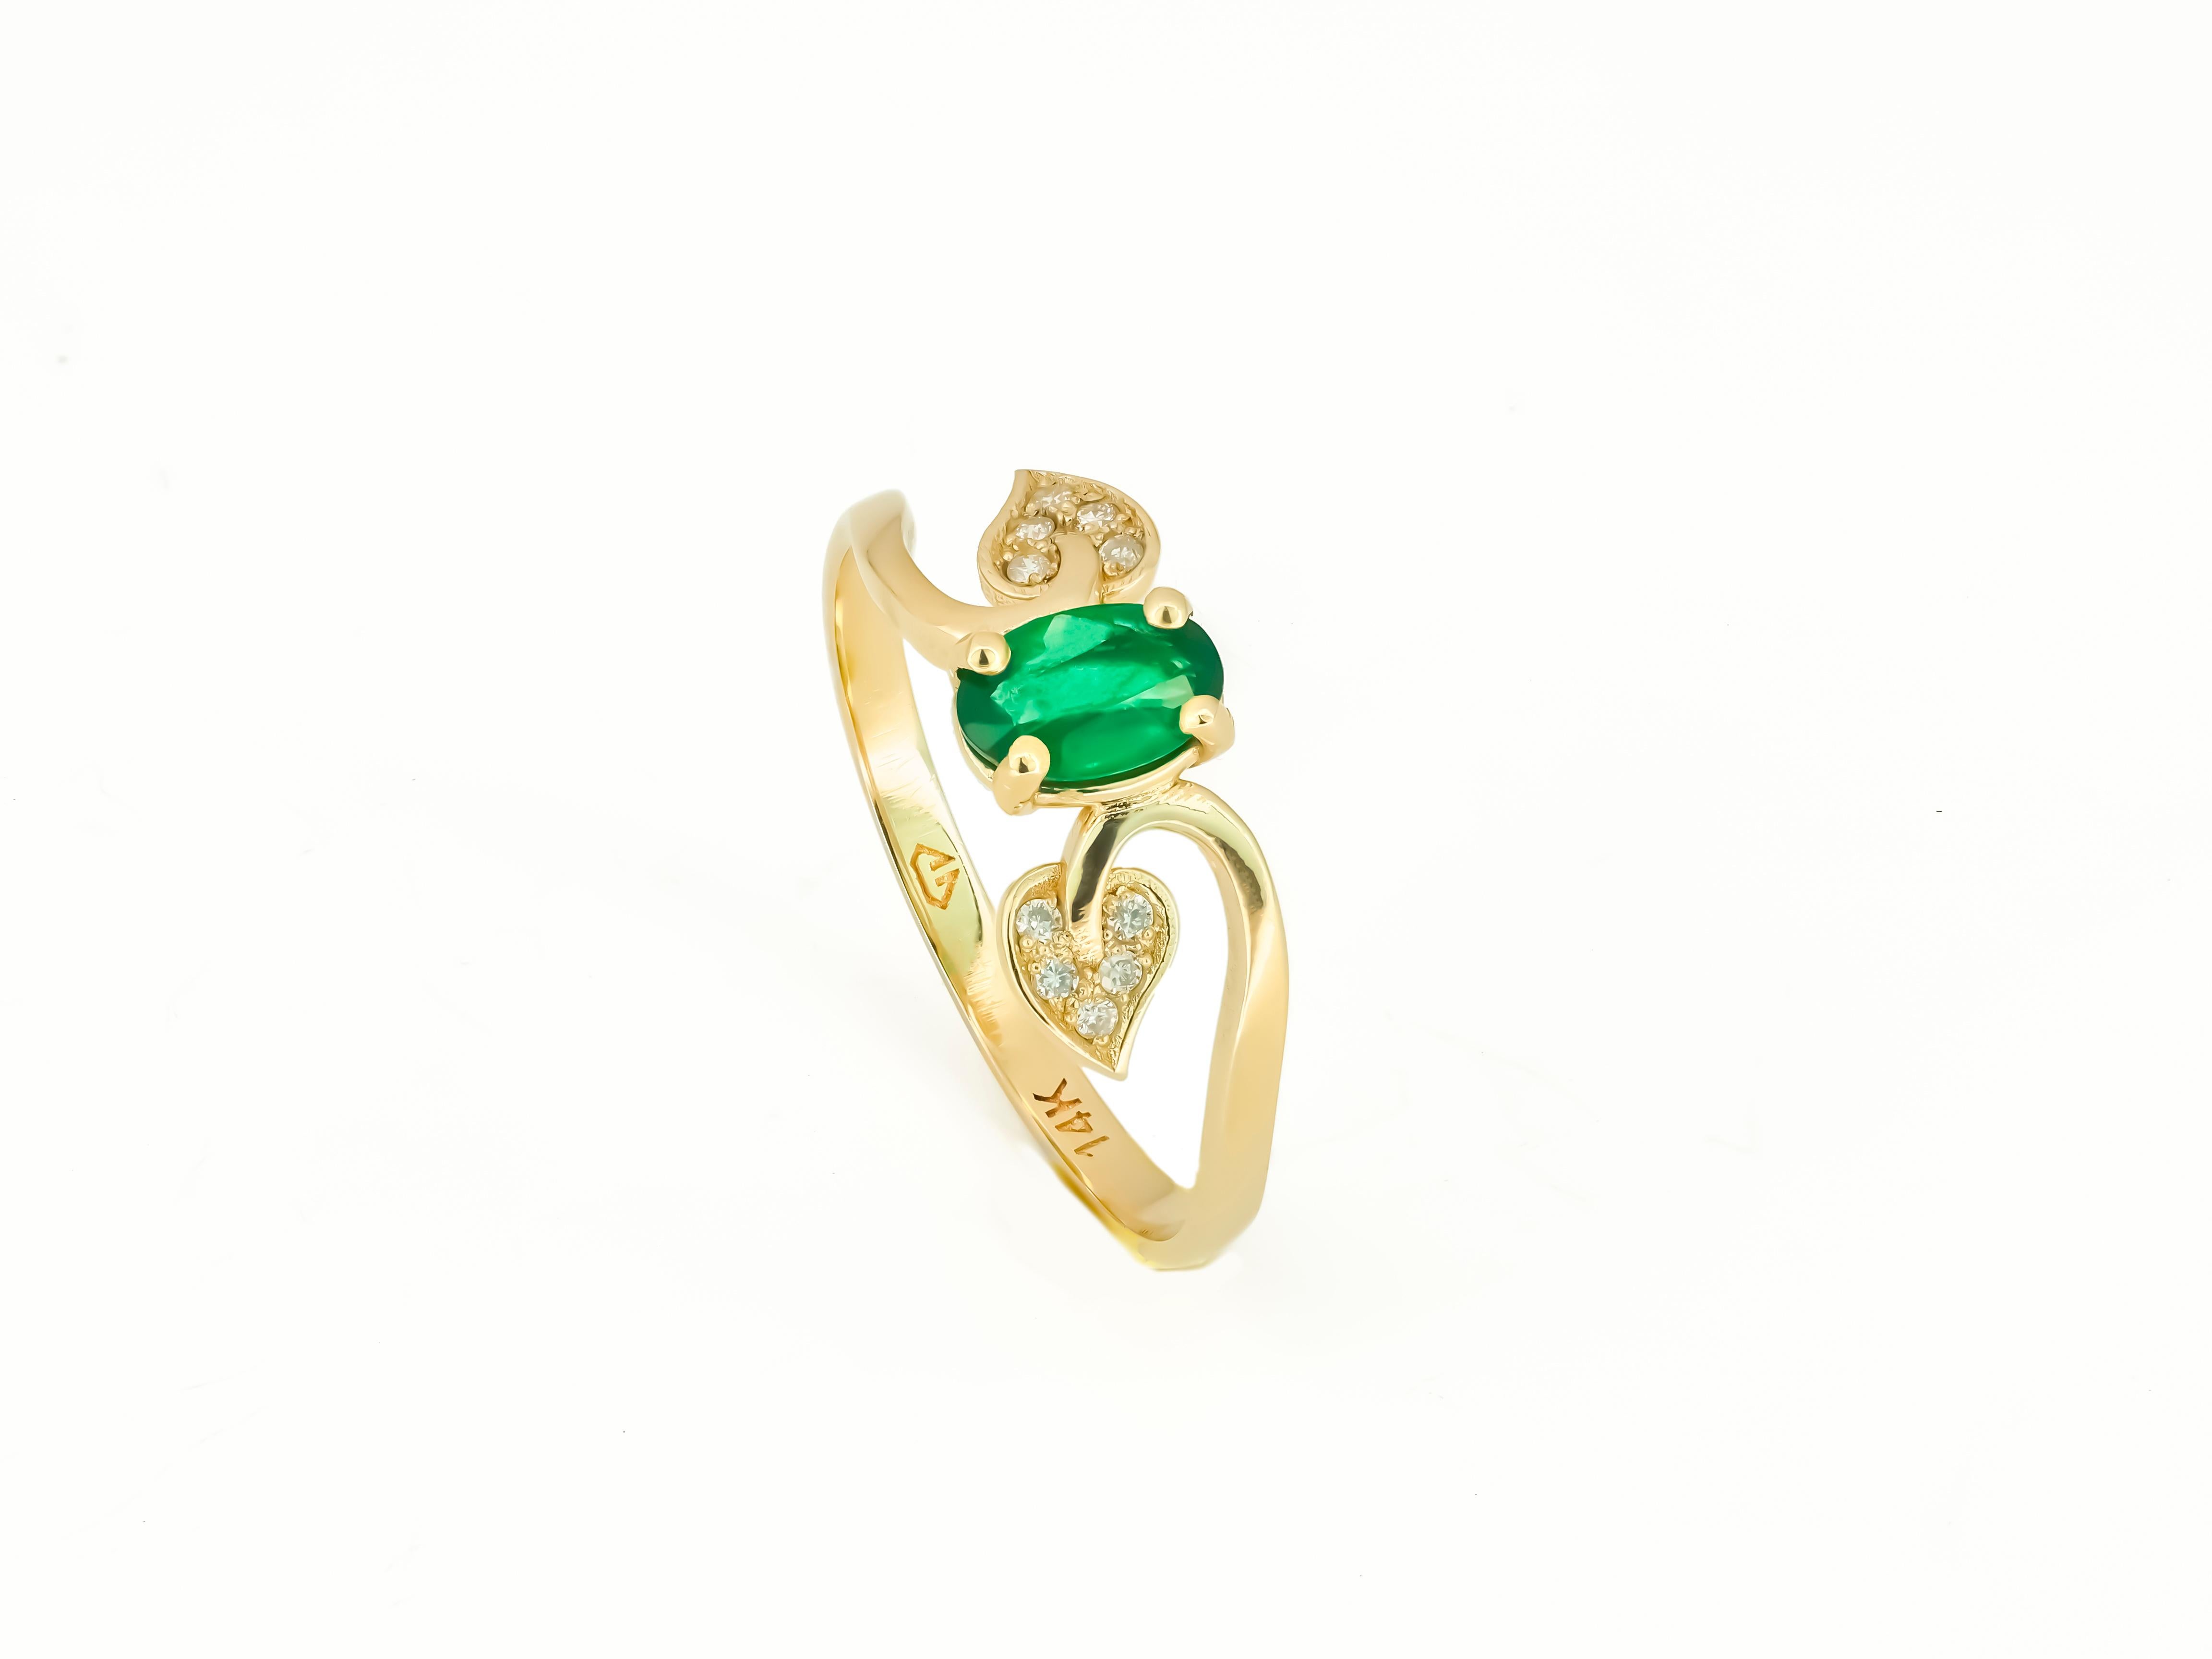 For Sale:  Genuine Emerald 14k Gold Ring, Emerald Engagement Ring! 7